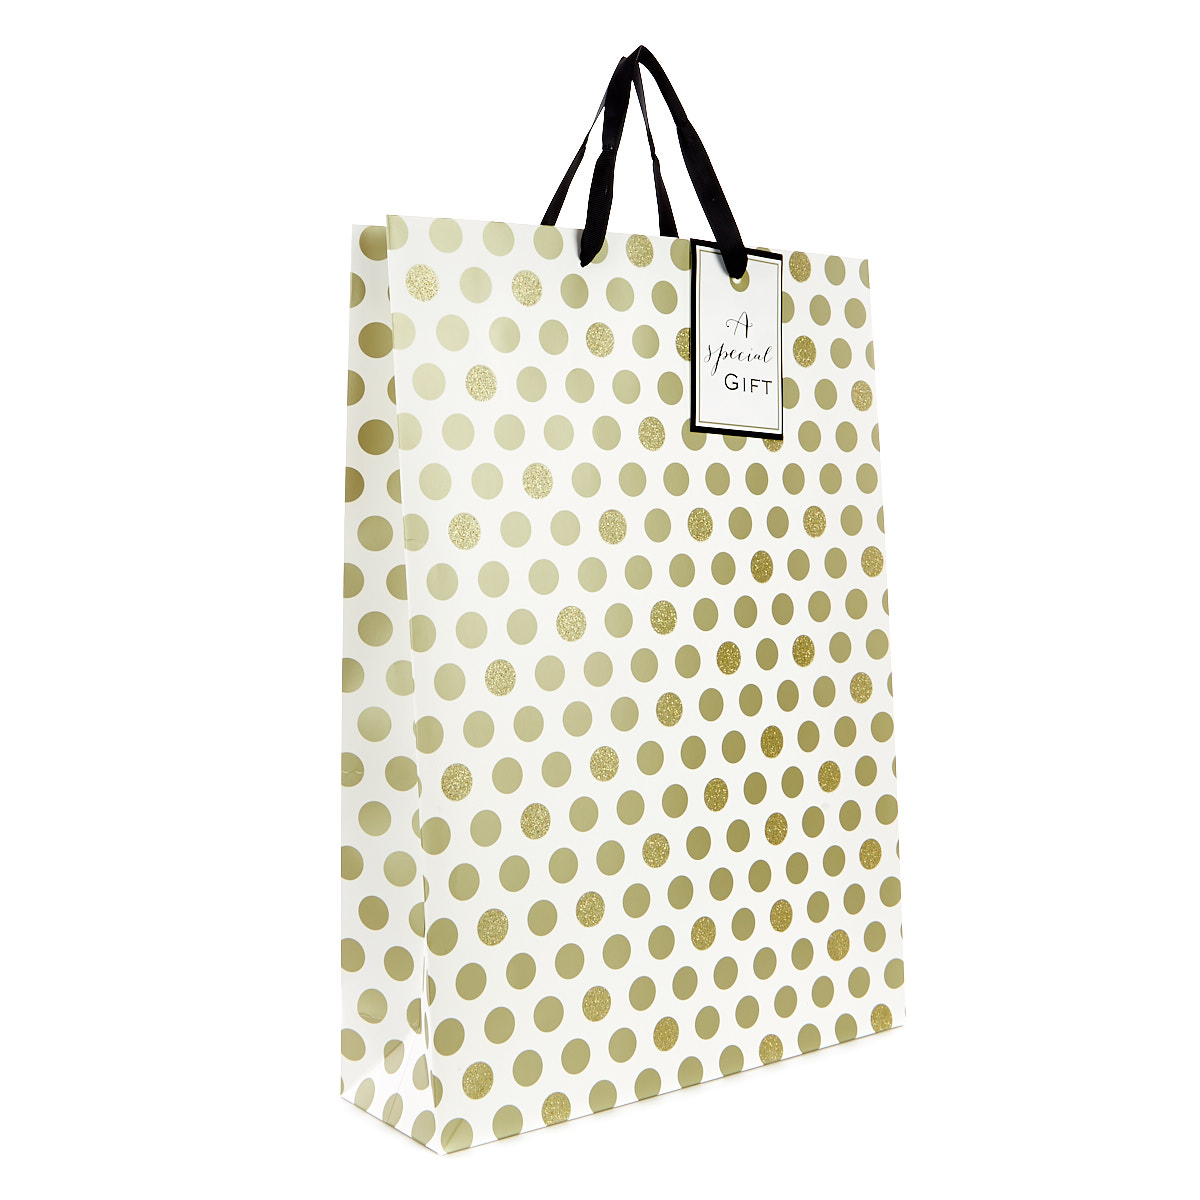 Extra Large Portrait Gold Sparkle Polka Dot Gift Bag - A Special Gift